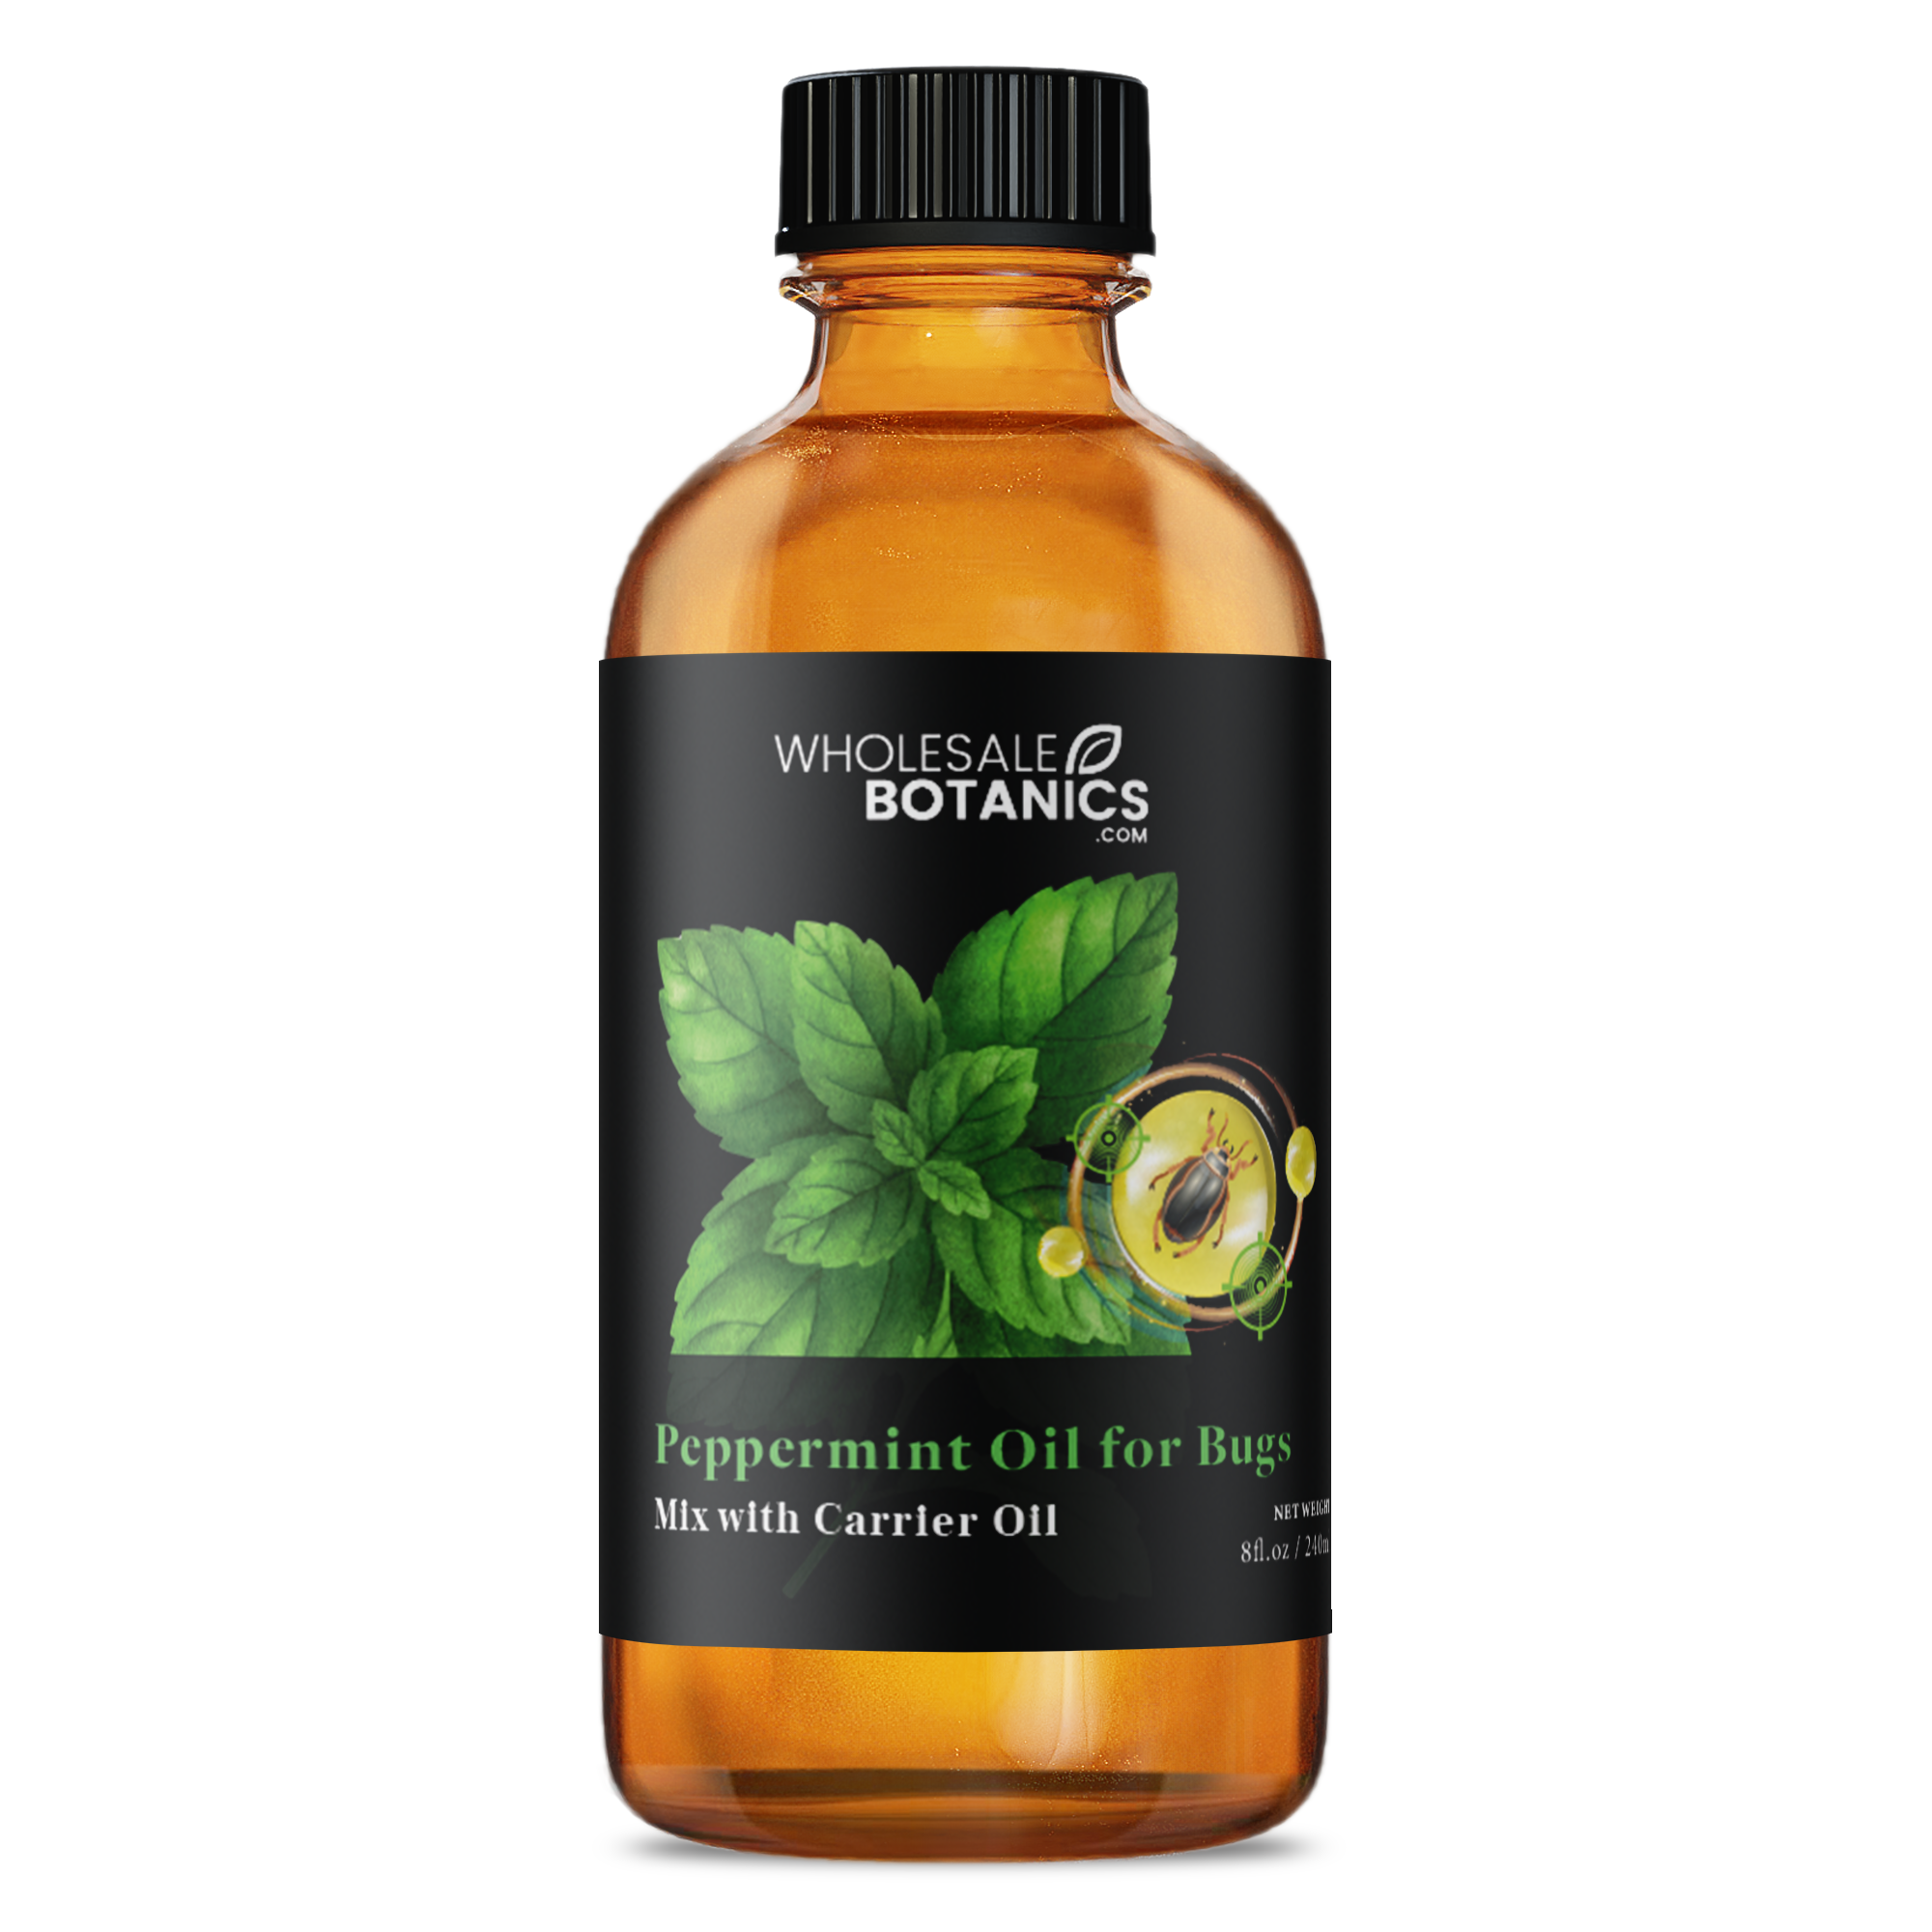 Peppermint Oil for Bugs